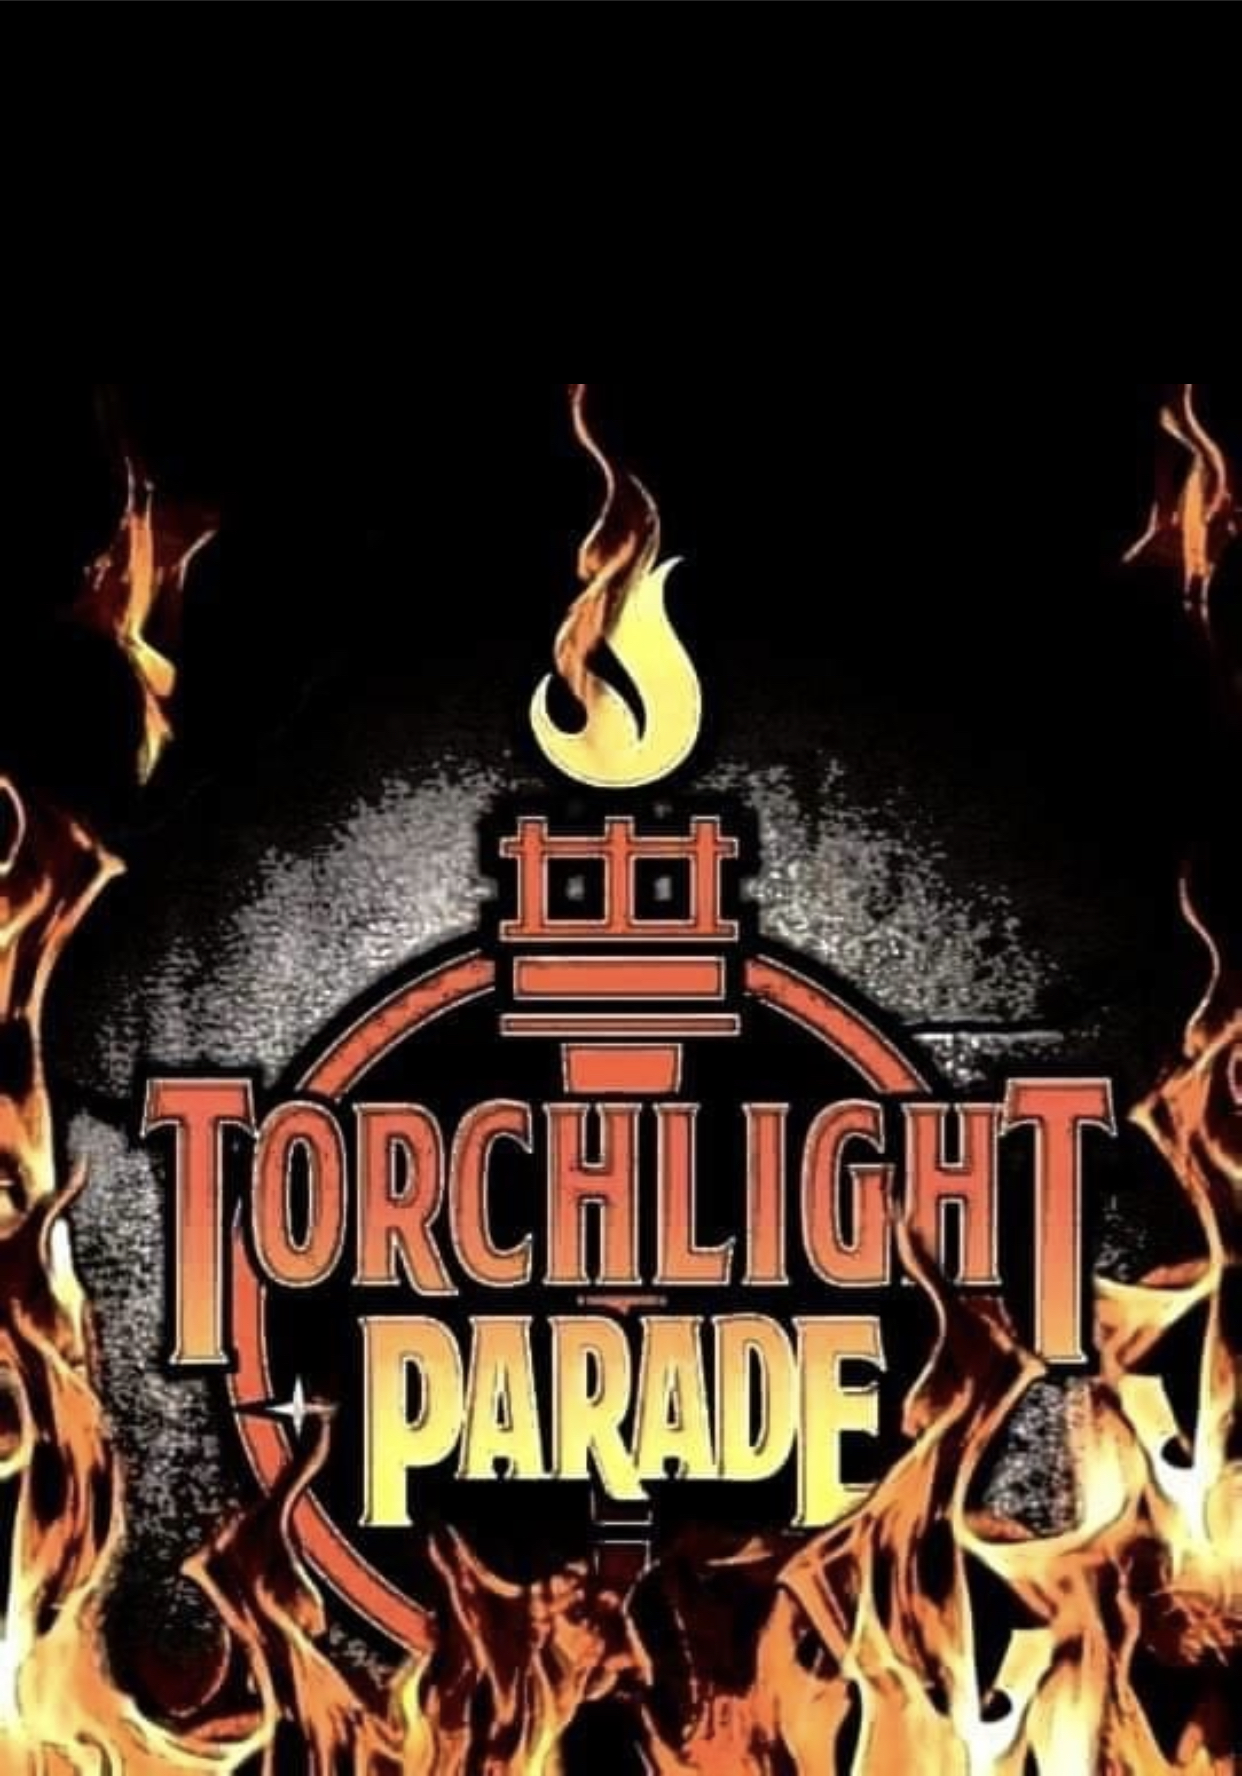 Art for Salvation by Torchlight Parade